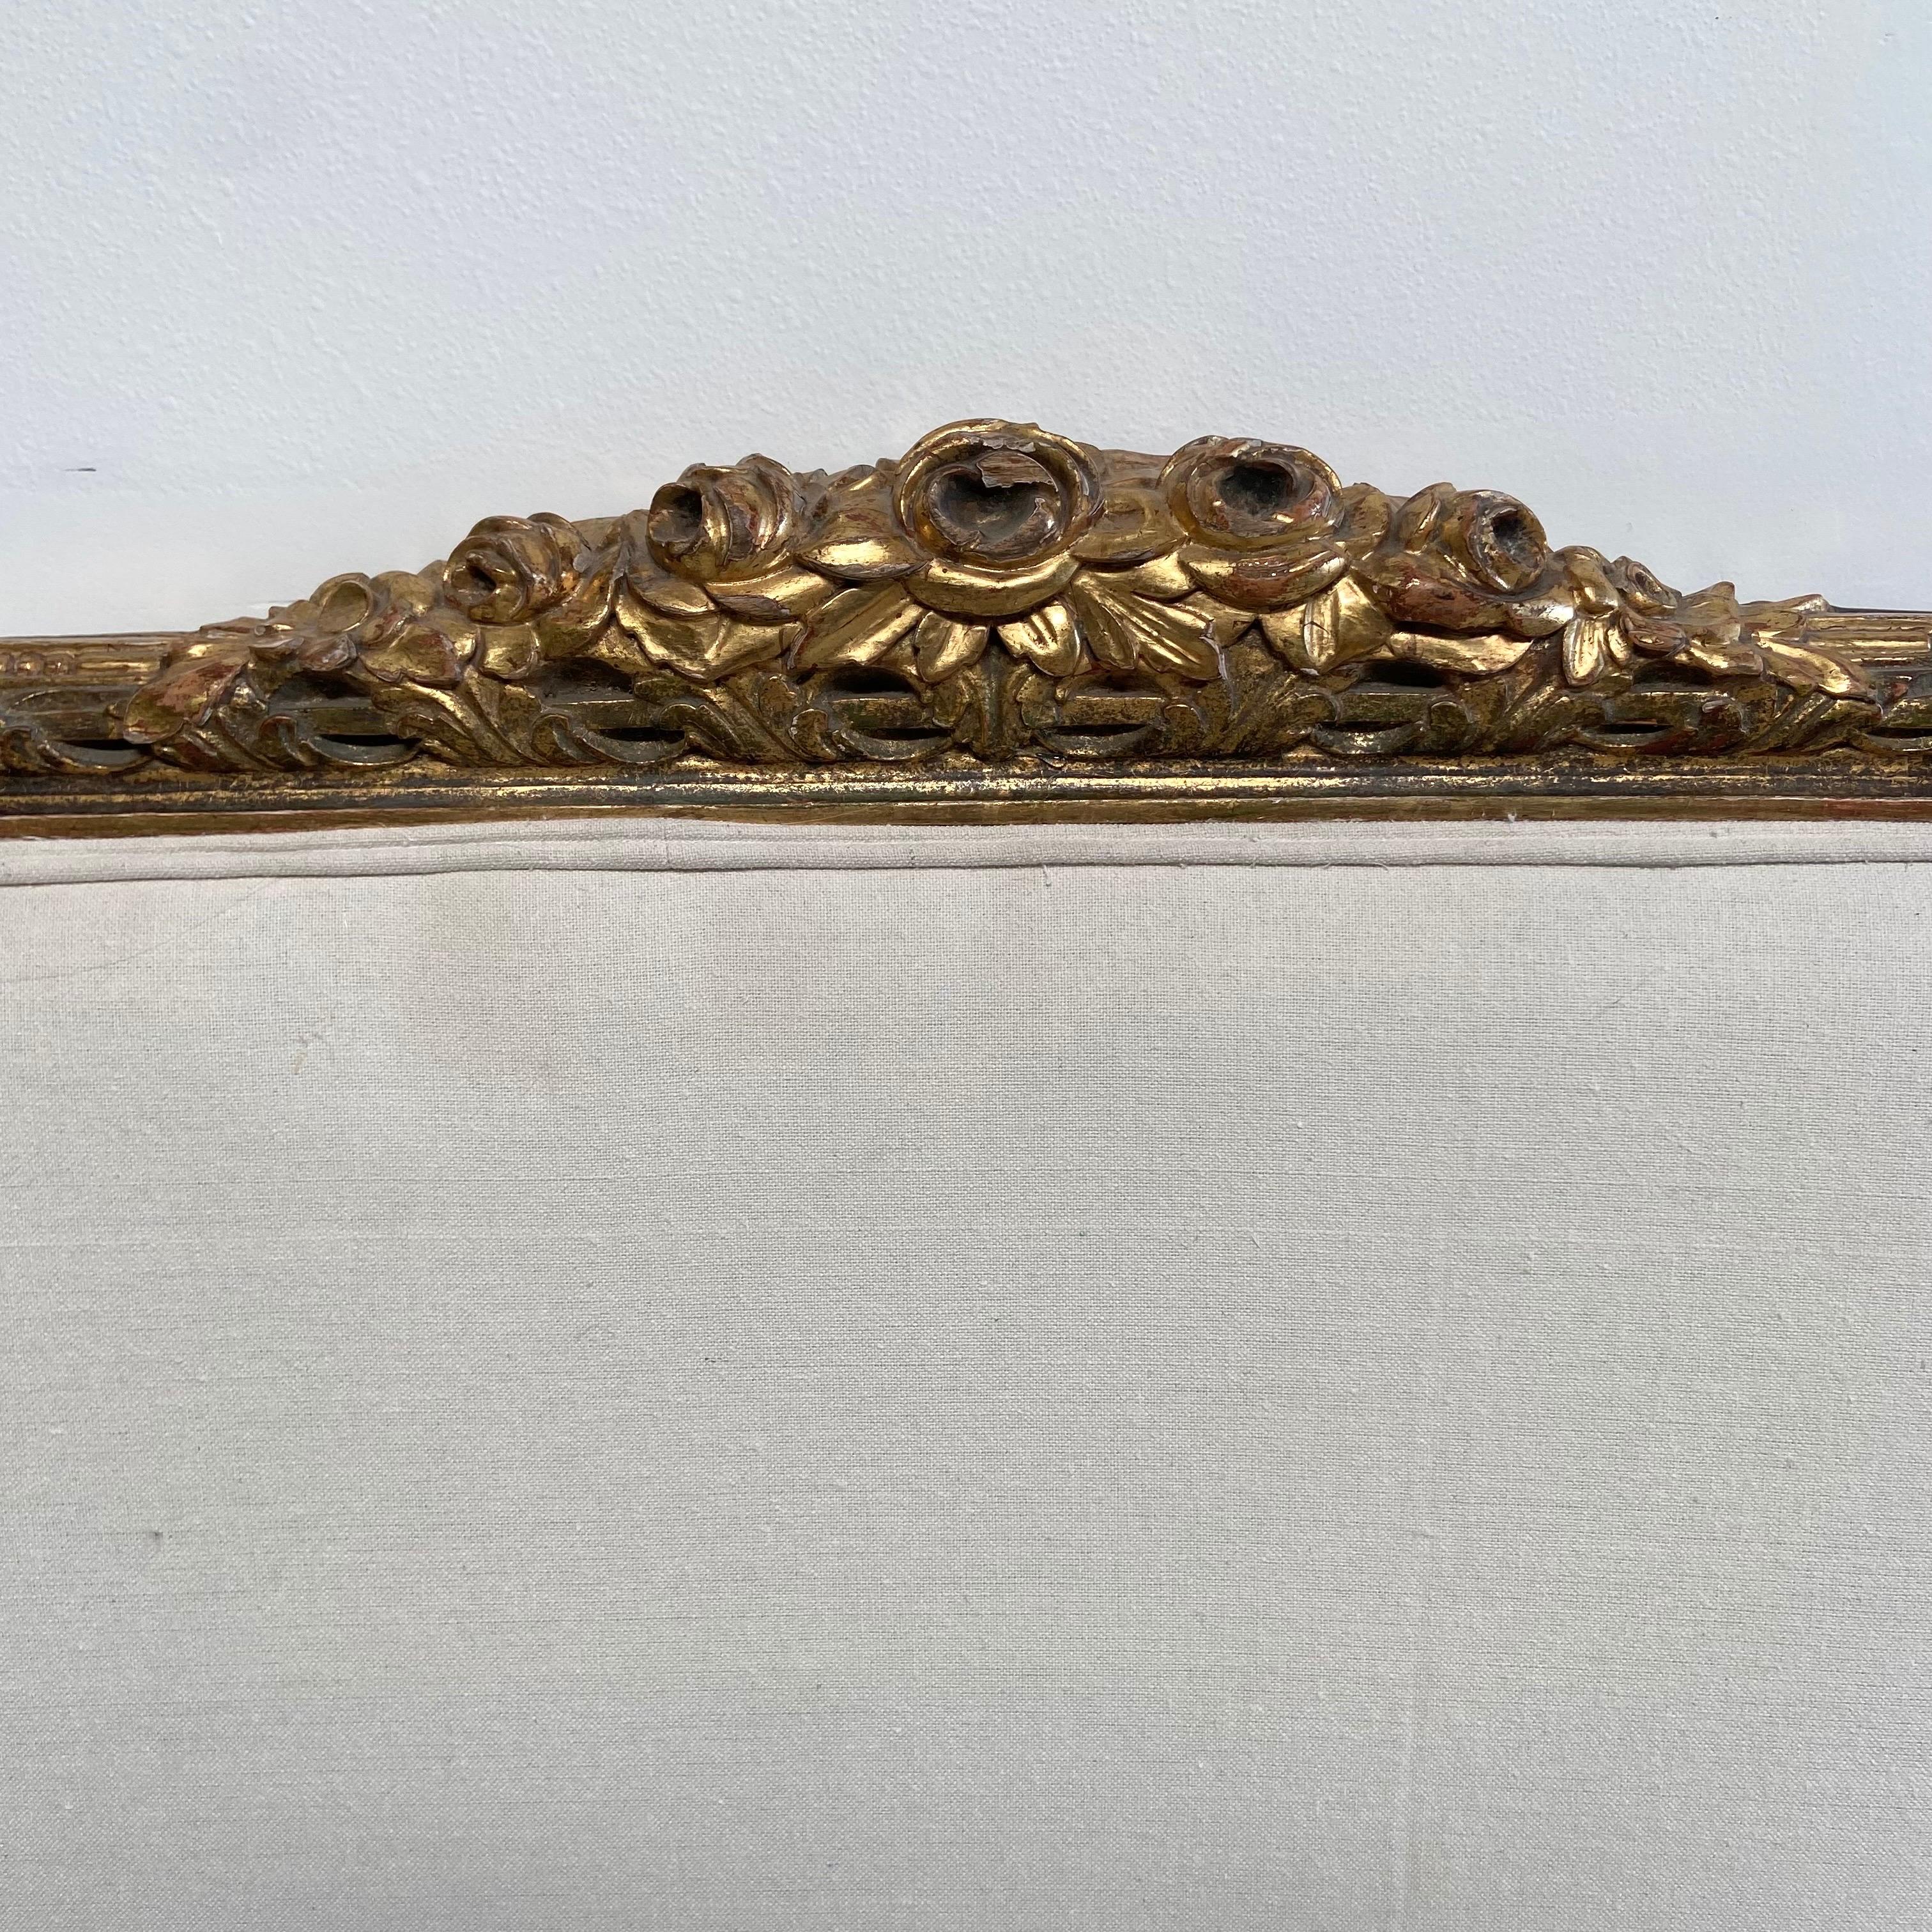 Vintage gilt headboard 70-1/2”W x 50”H x 2-1/2”D
This vintage headboard would fit a US queen, and could possibly be used for a CAL king as well.
A queen mattress is 60